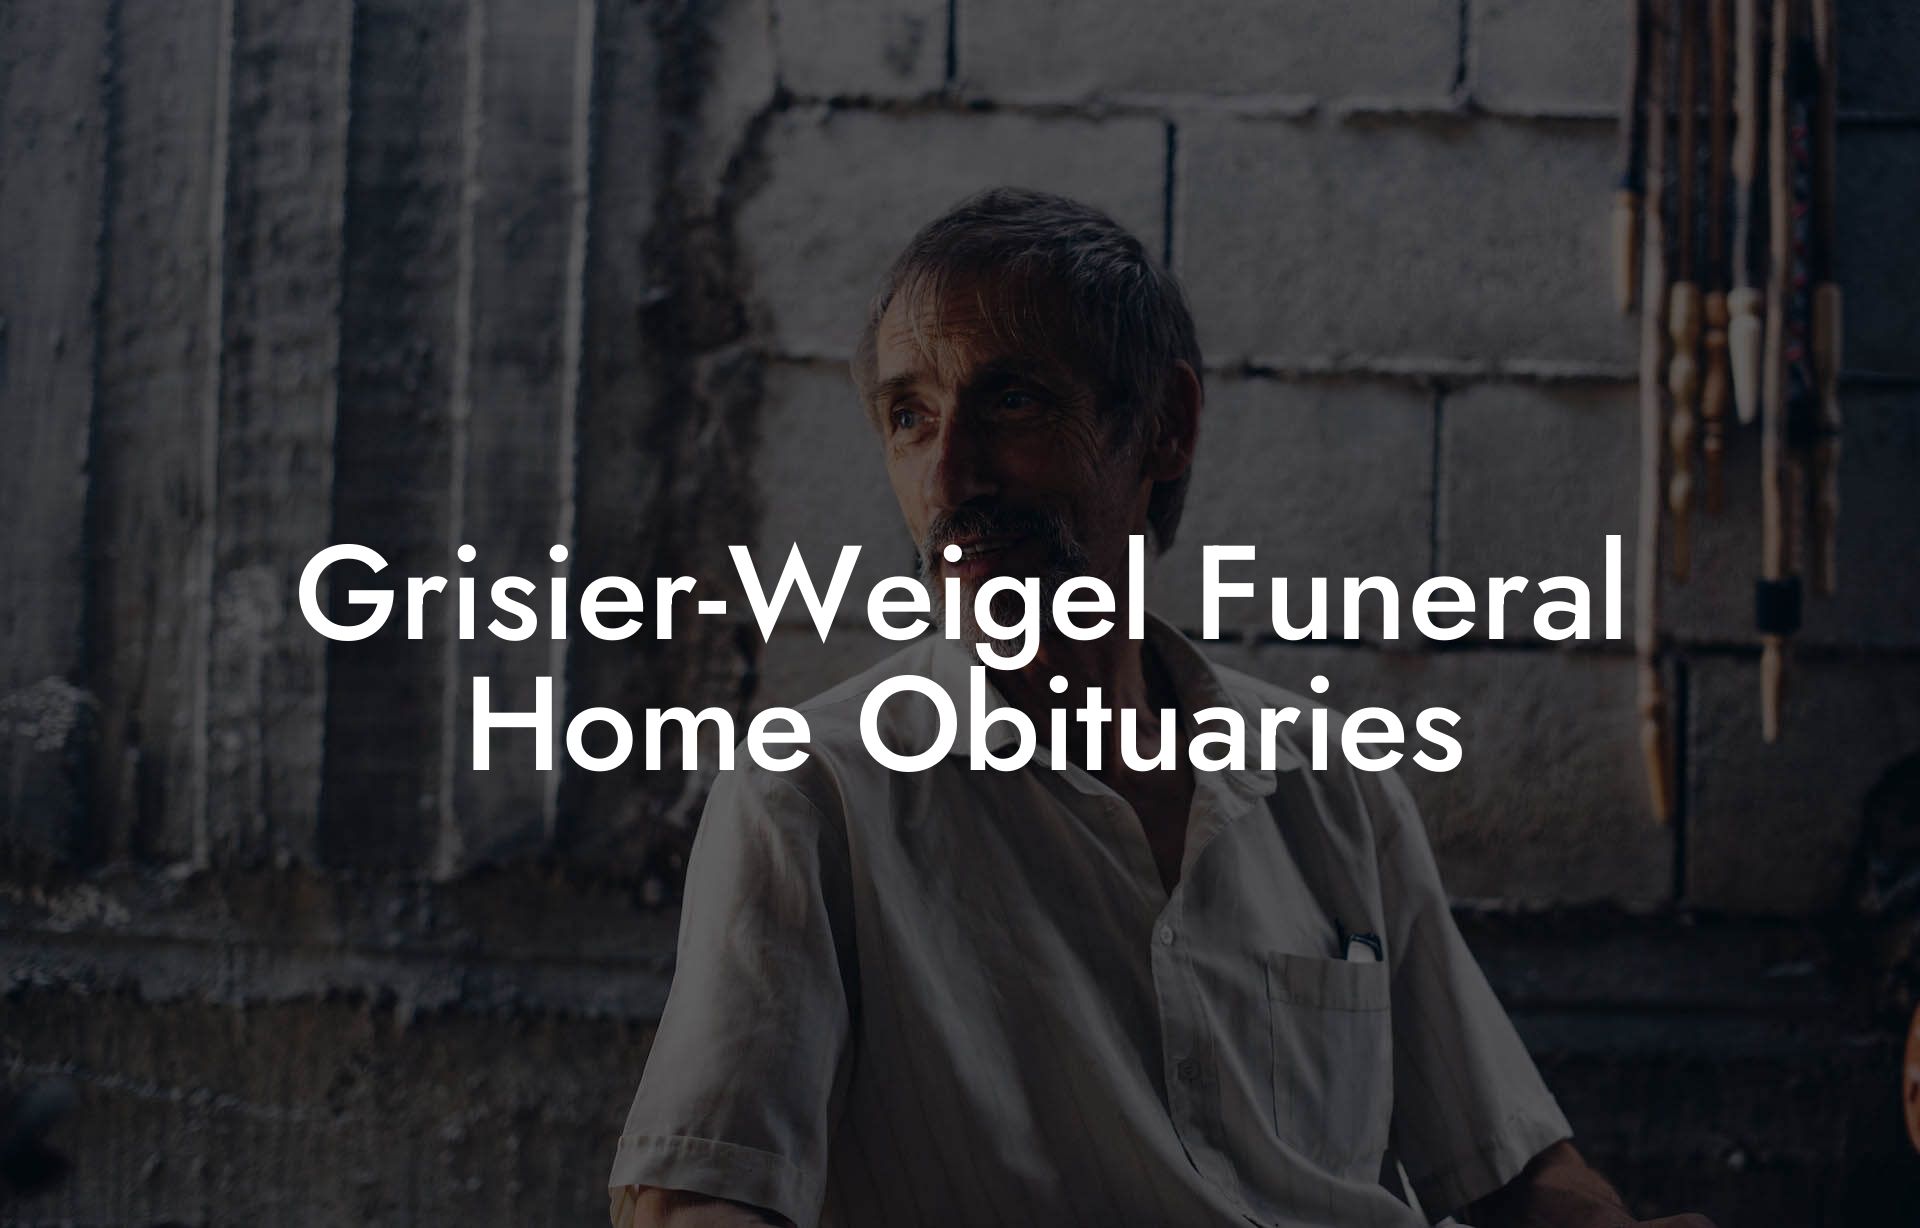 Grisier-Weigel Funeral Home Obituaries